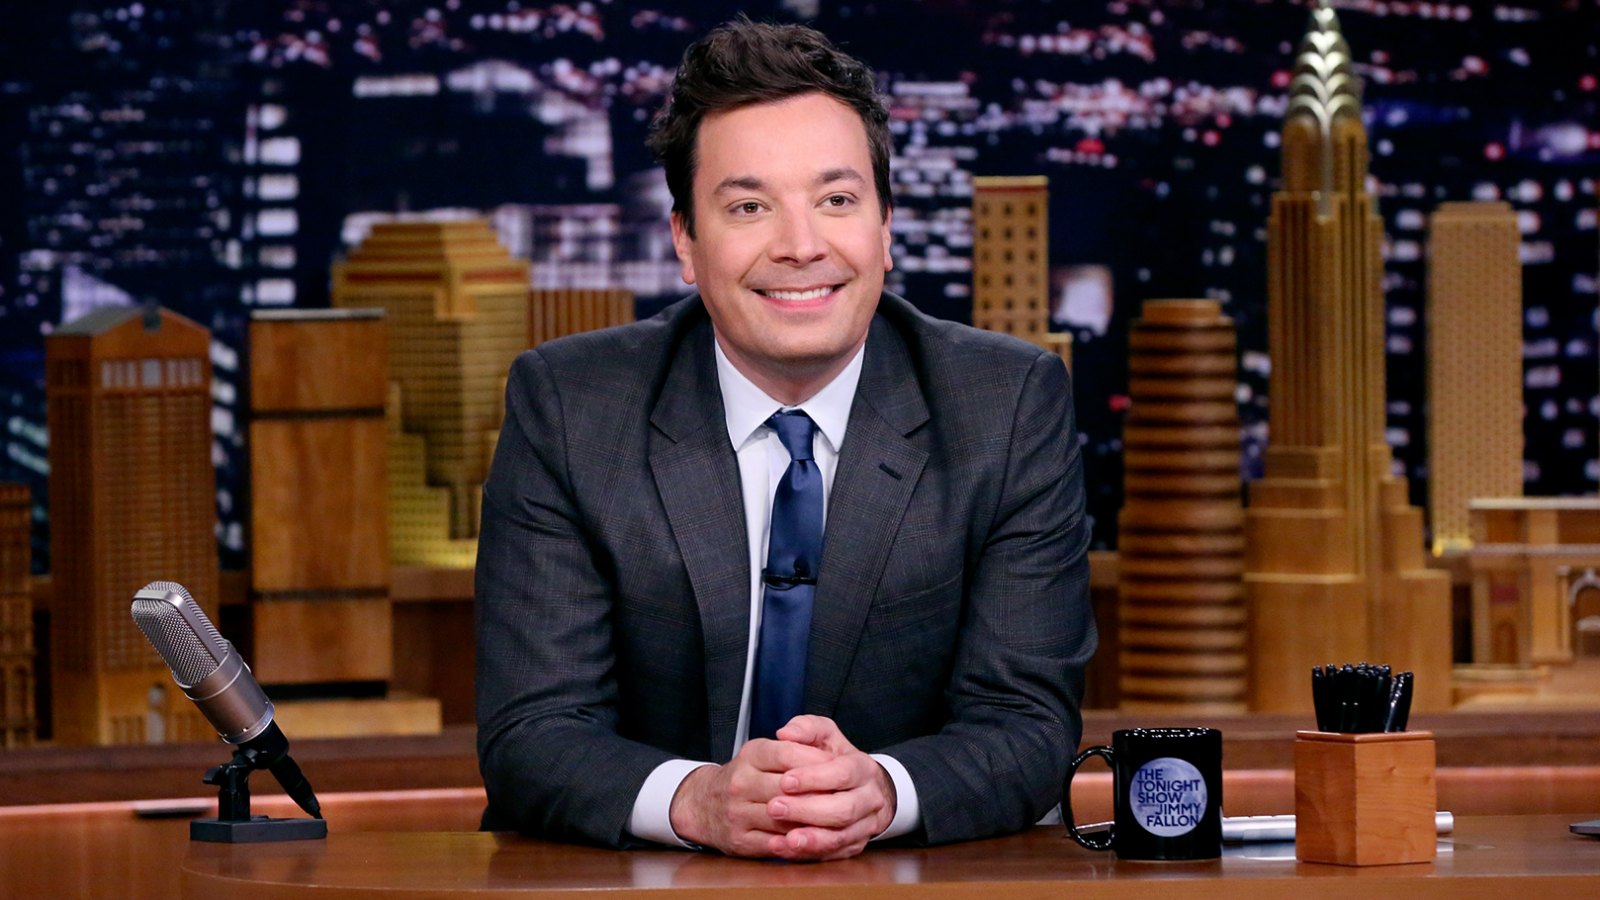 Jimmy Fallon Picks Up $1,136 Tab for Diners at Hamptons Restaurant: ‘I Wanted to Do Something Nice for You’